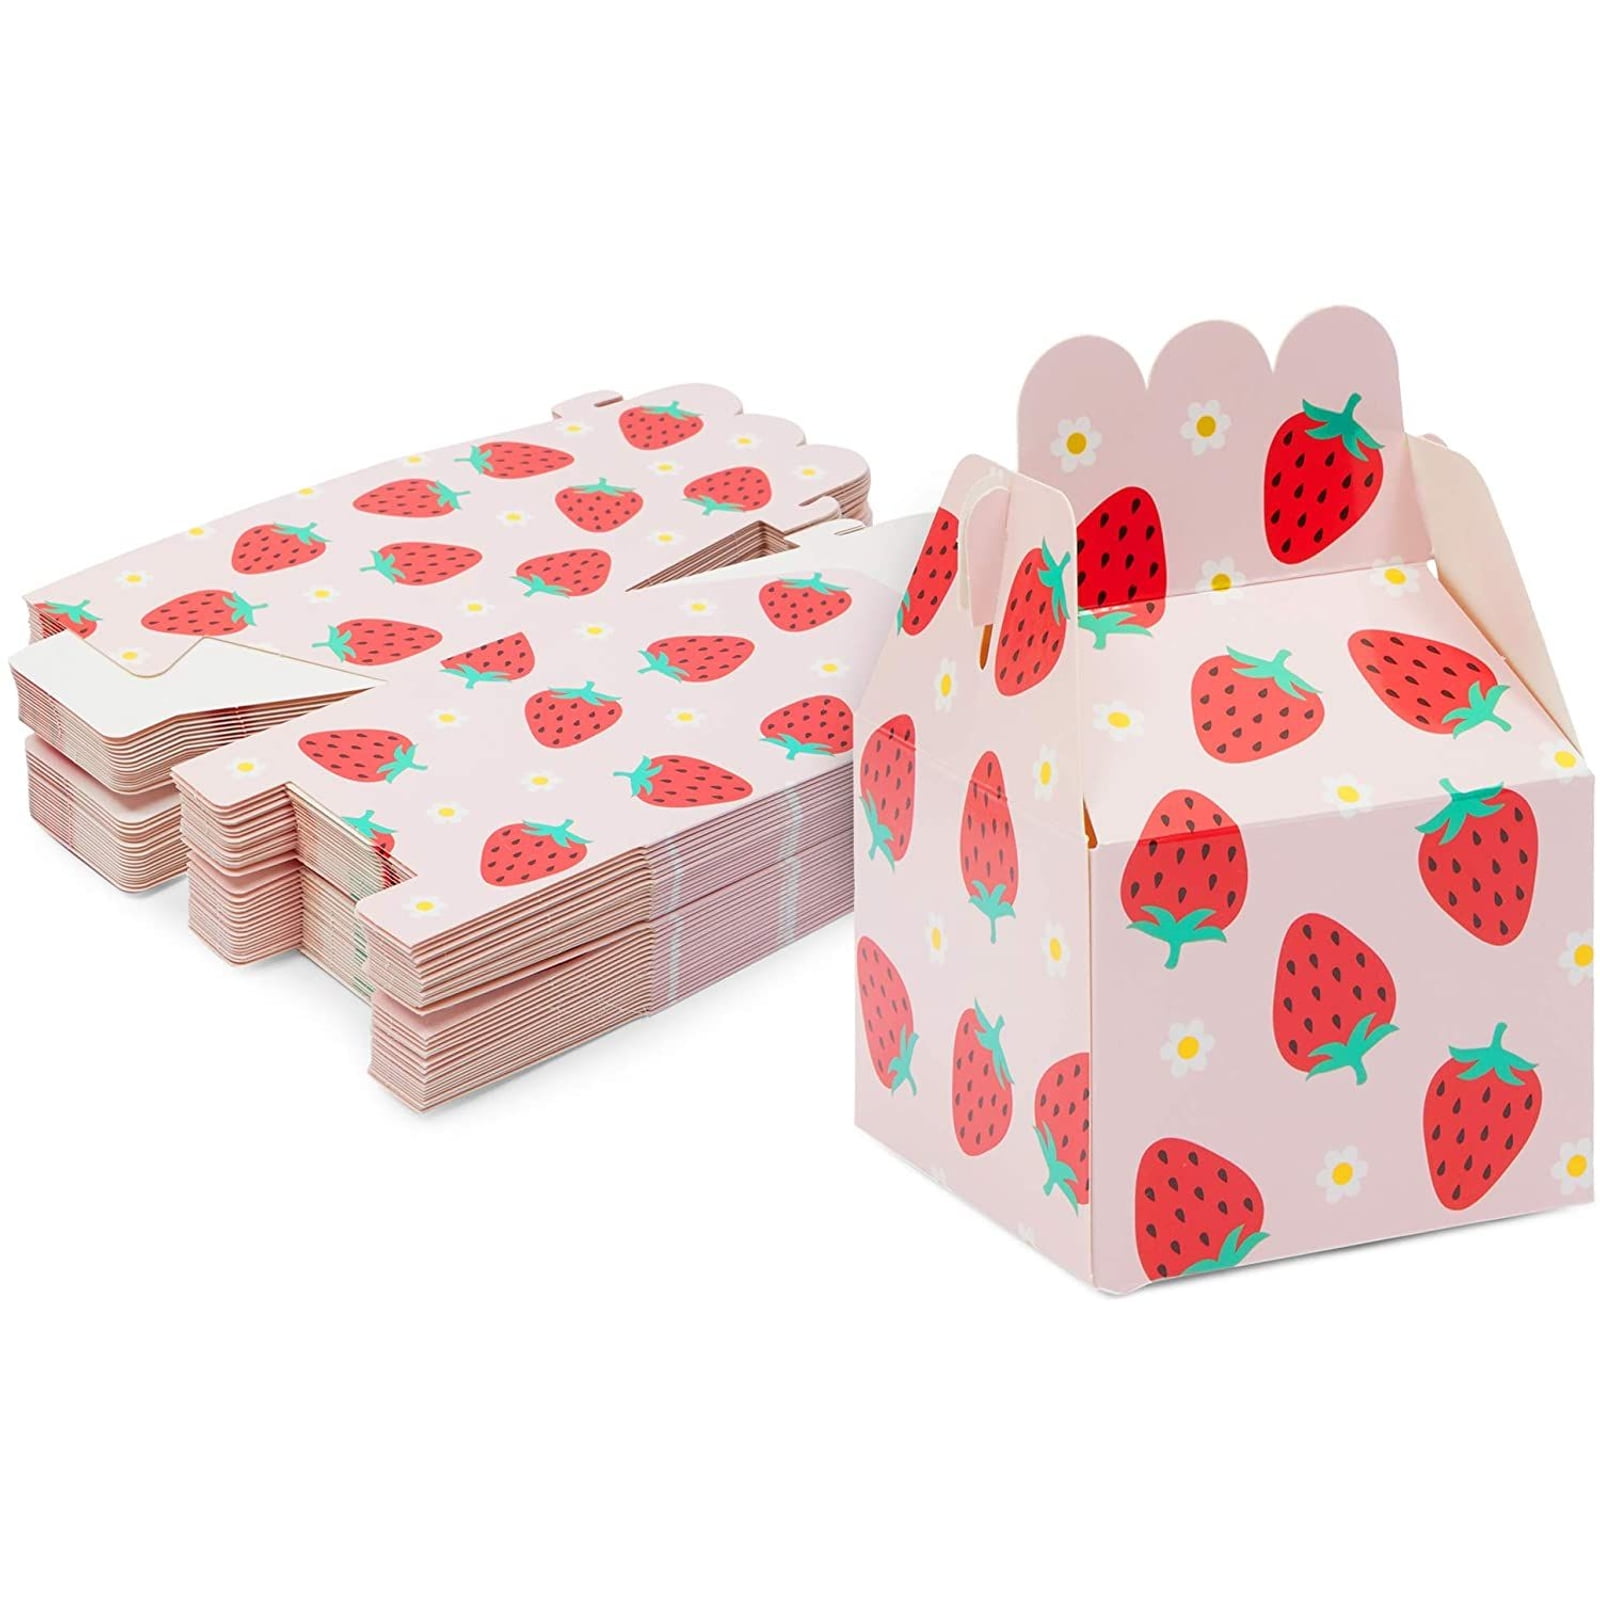 Strawberry Shortcake 3 fabric choices Polka dots handbag tote purse bag all ages available matching accessories perfect gift for all seasons